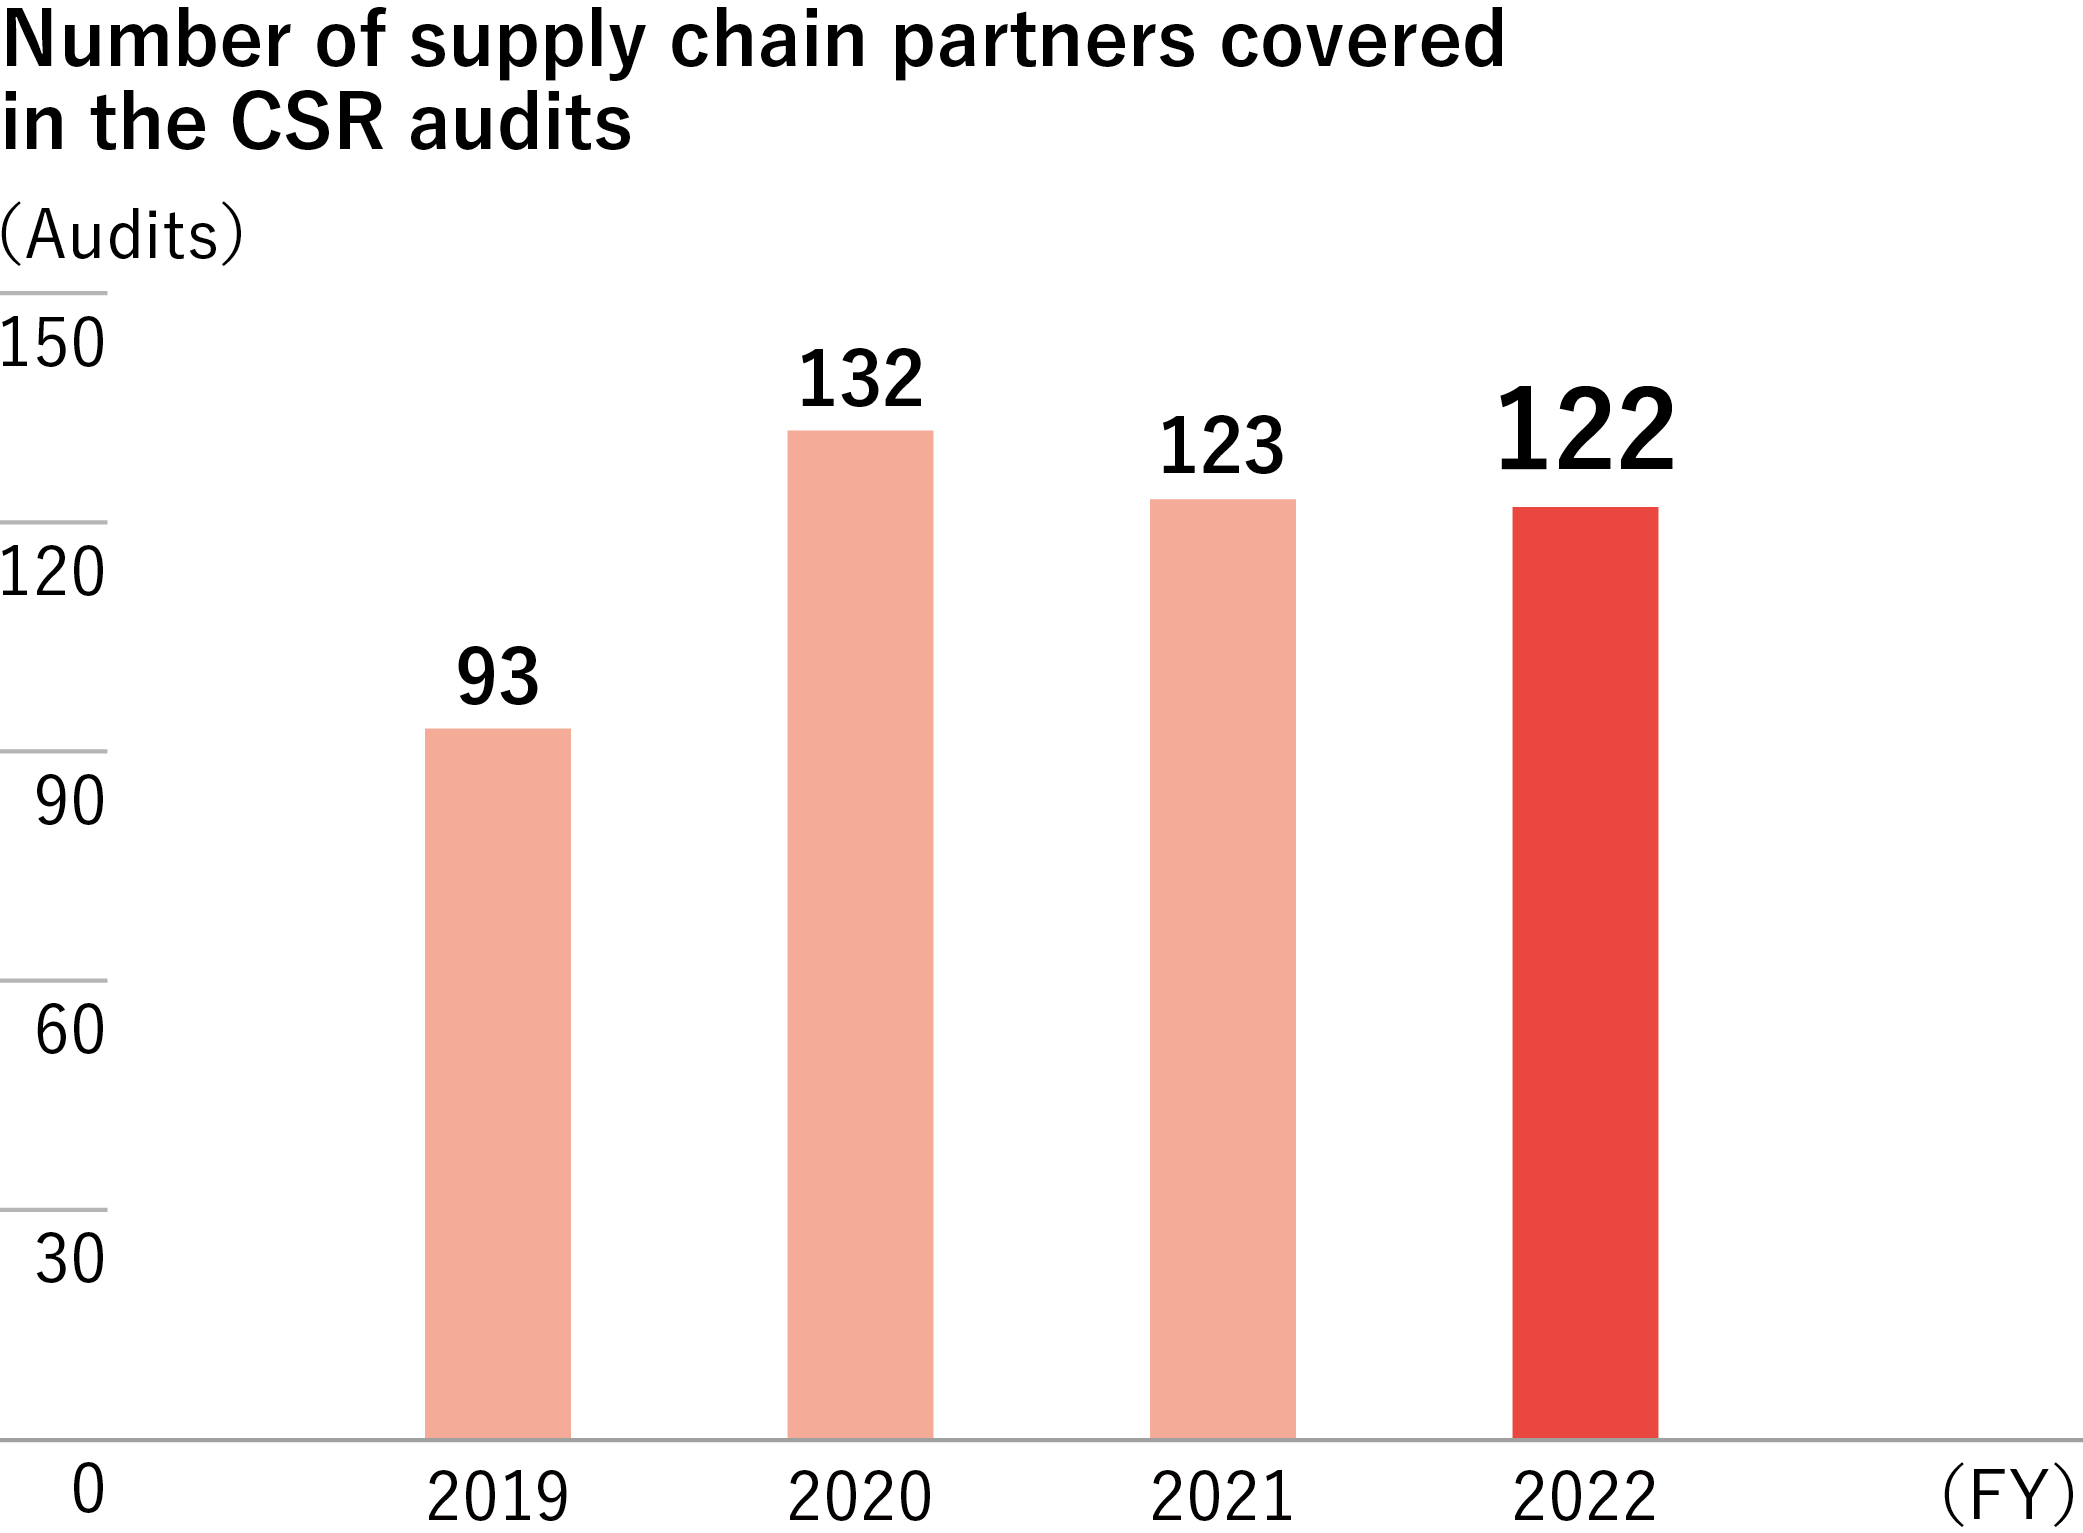 Number of supply chain partners covered in the CSR audits